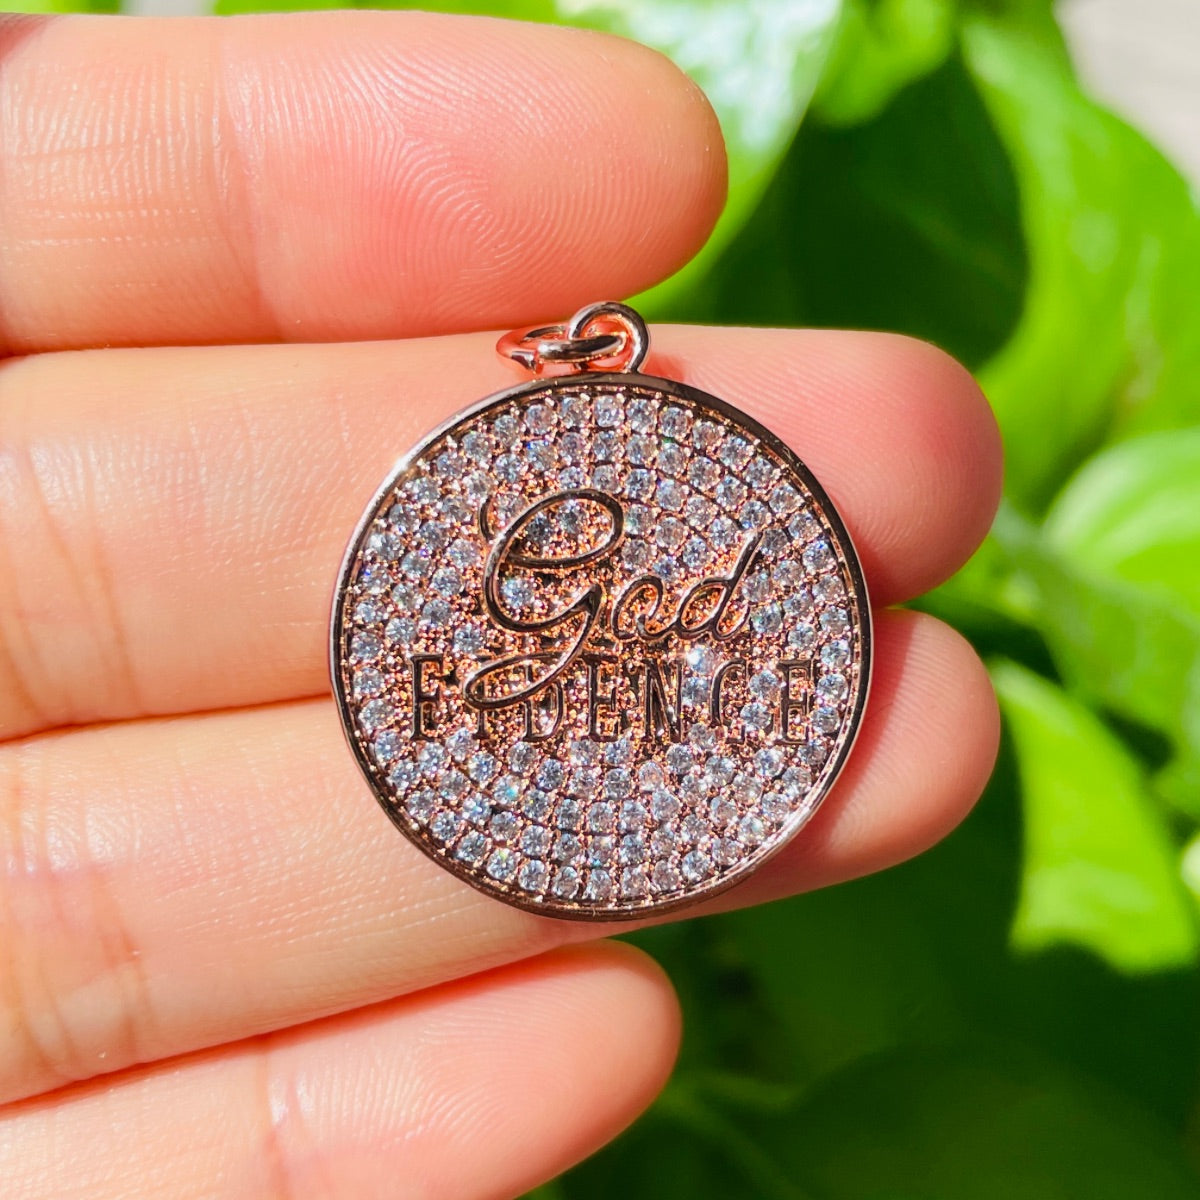 10pcs/lot 25mm CZ Pave Round Plate GODFIDENCE Quote Charms Rose Gold CZ Paved Charms Christian Quotes Discs On Sale Charms Beads Beyond